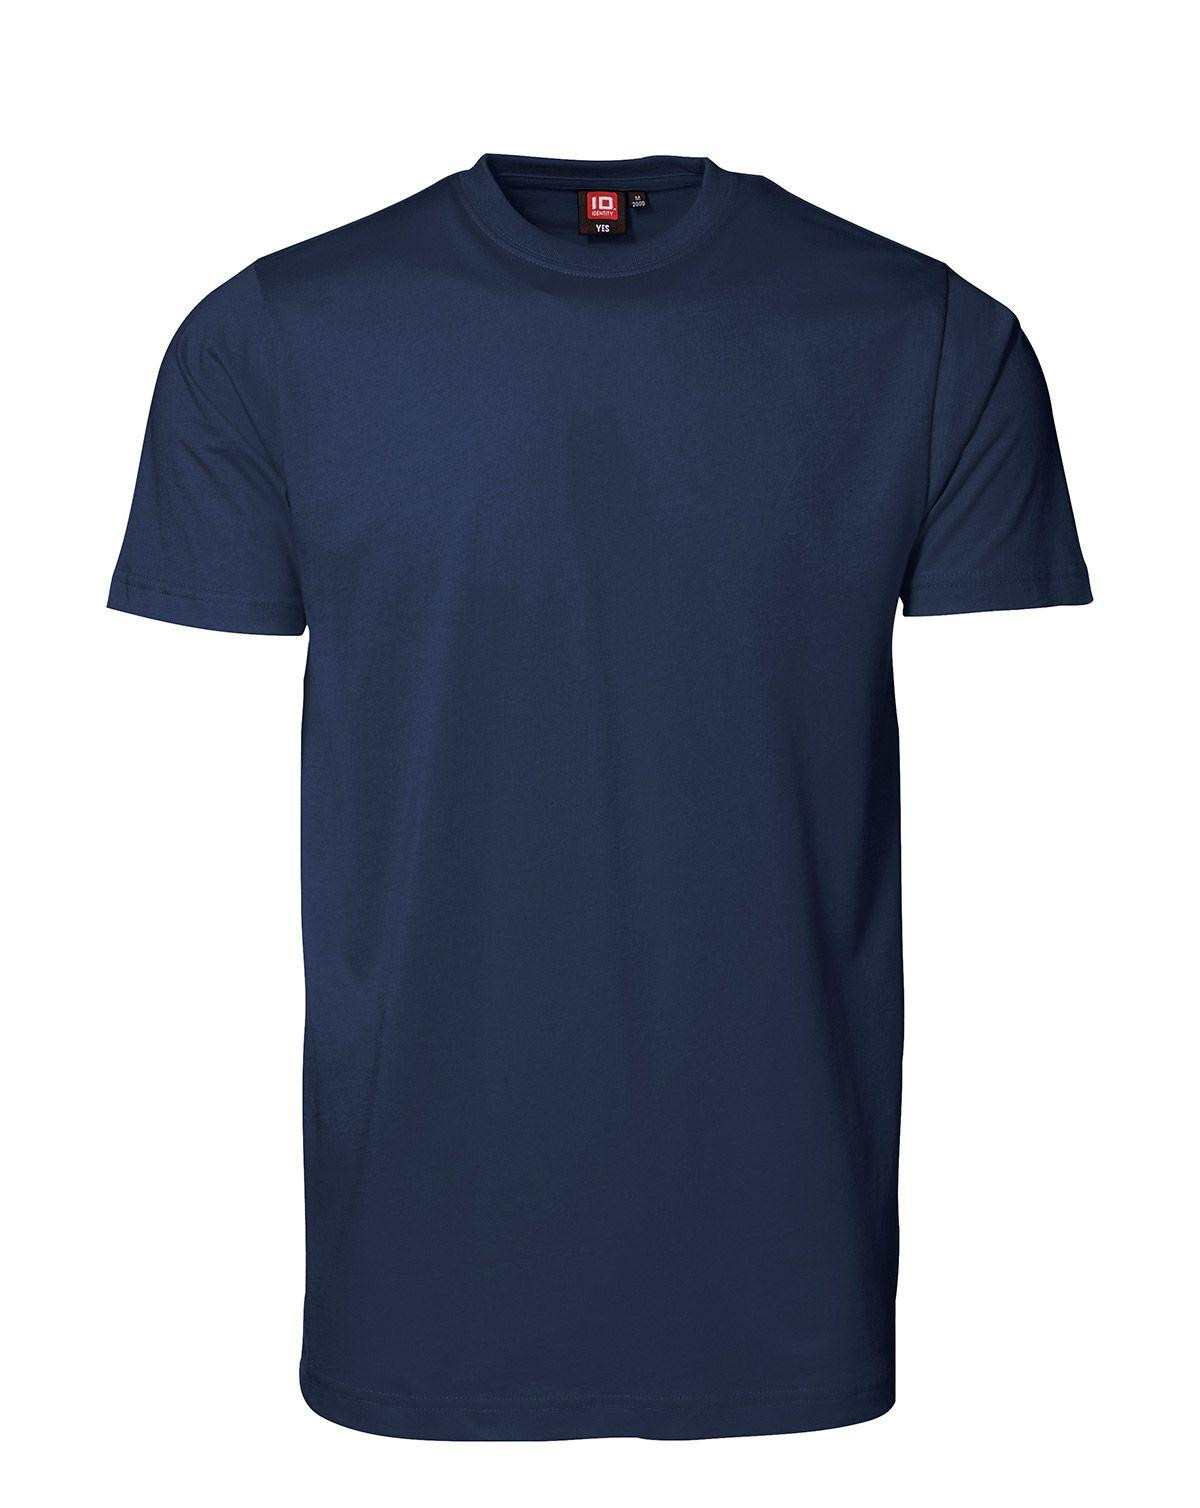 ID YES T-shirt (Navy, S)